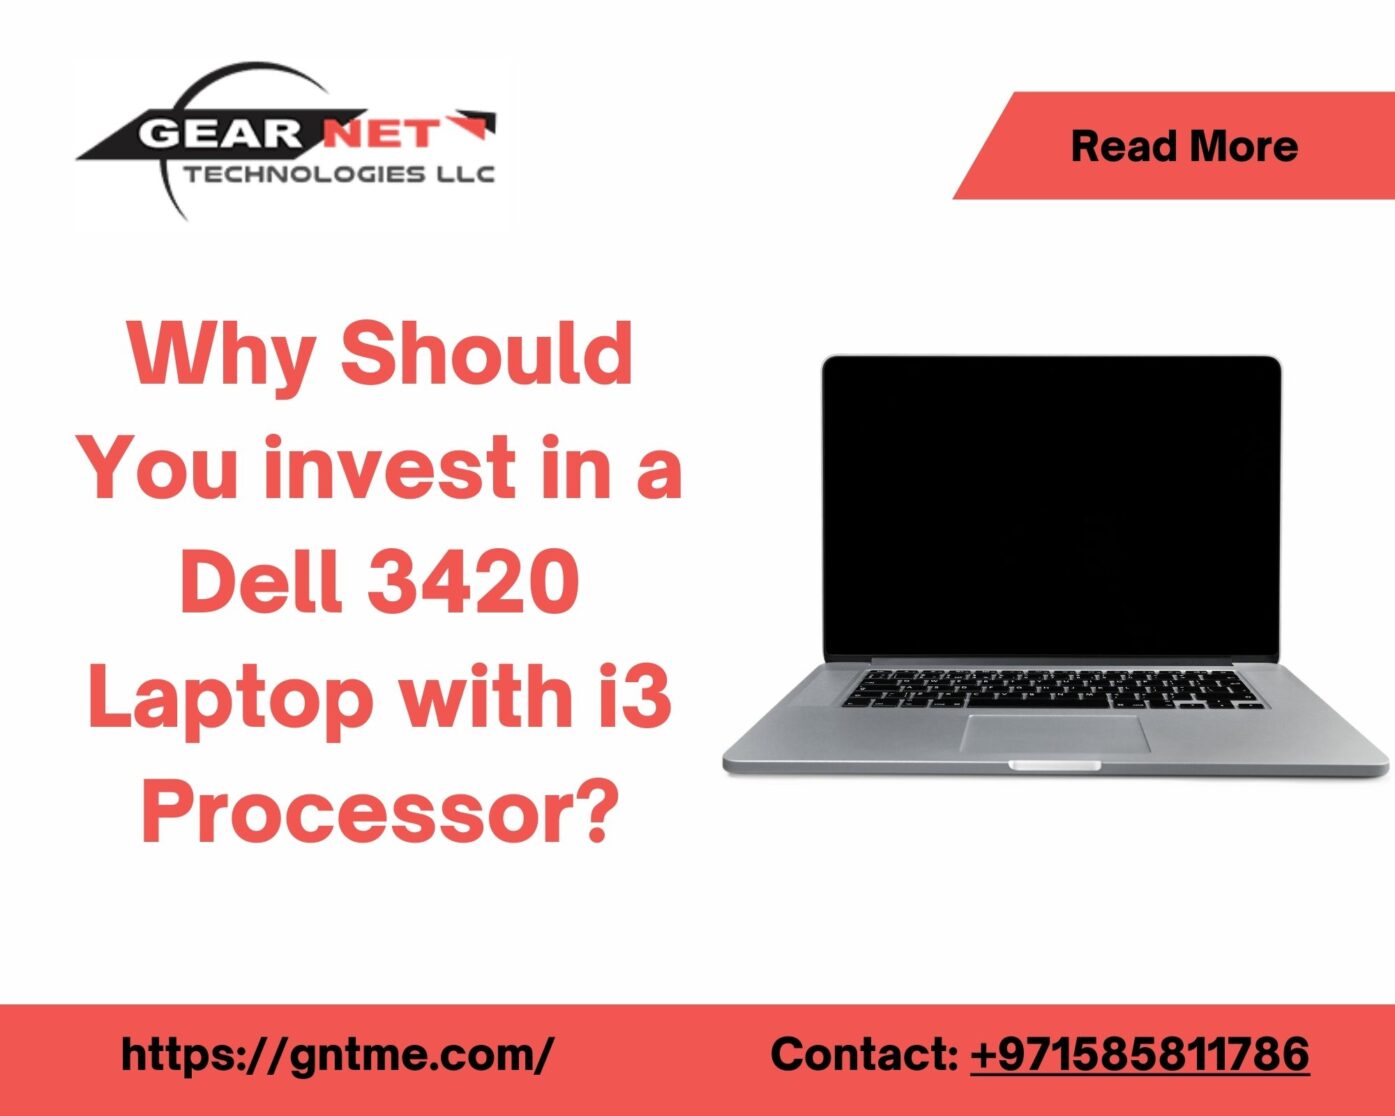 Why should you invest in a Dell 3420 Laptop with i3 Processor Gear Net Technologies LLC